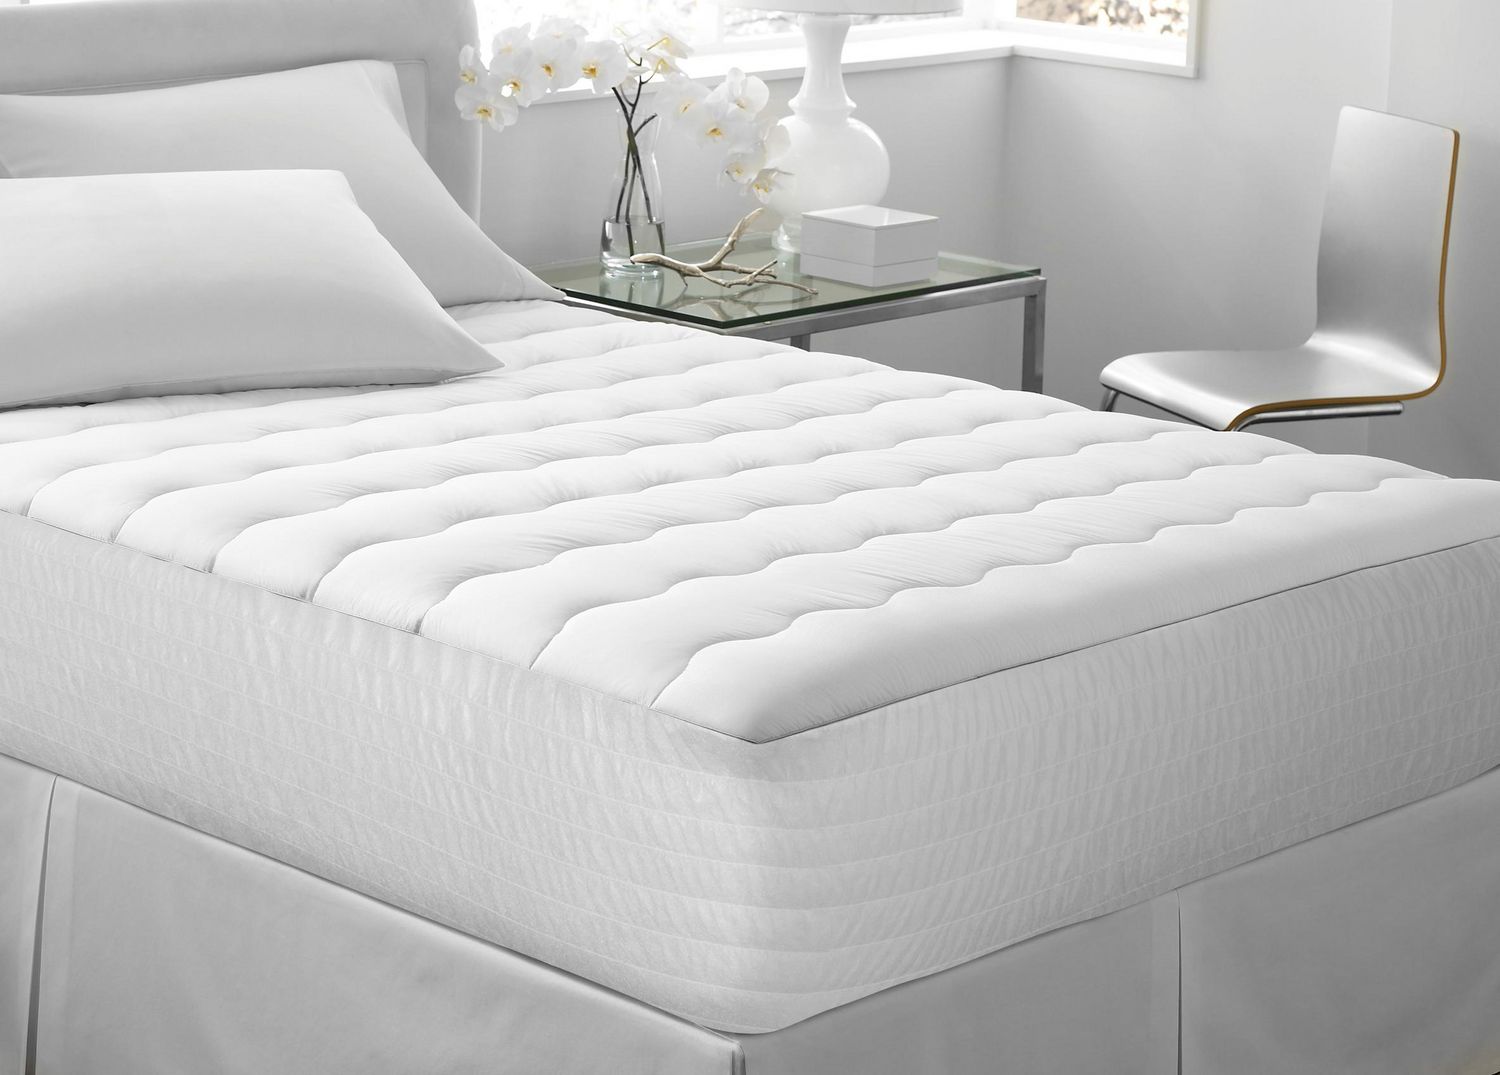 quilted bassinet mattress pad cover